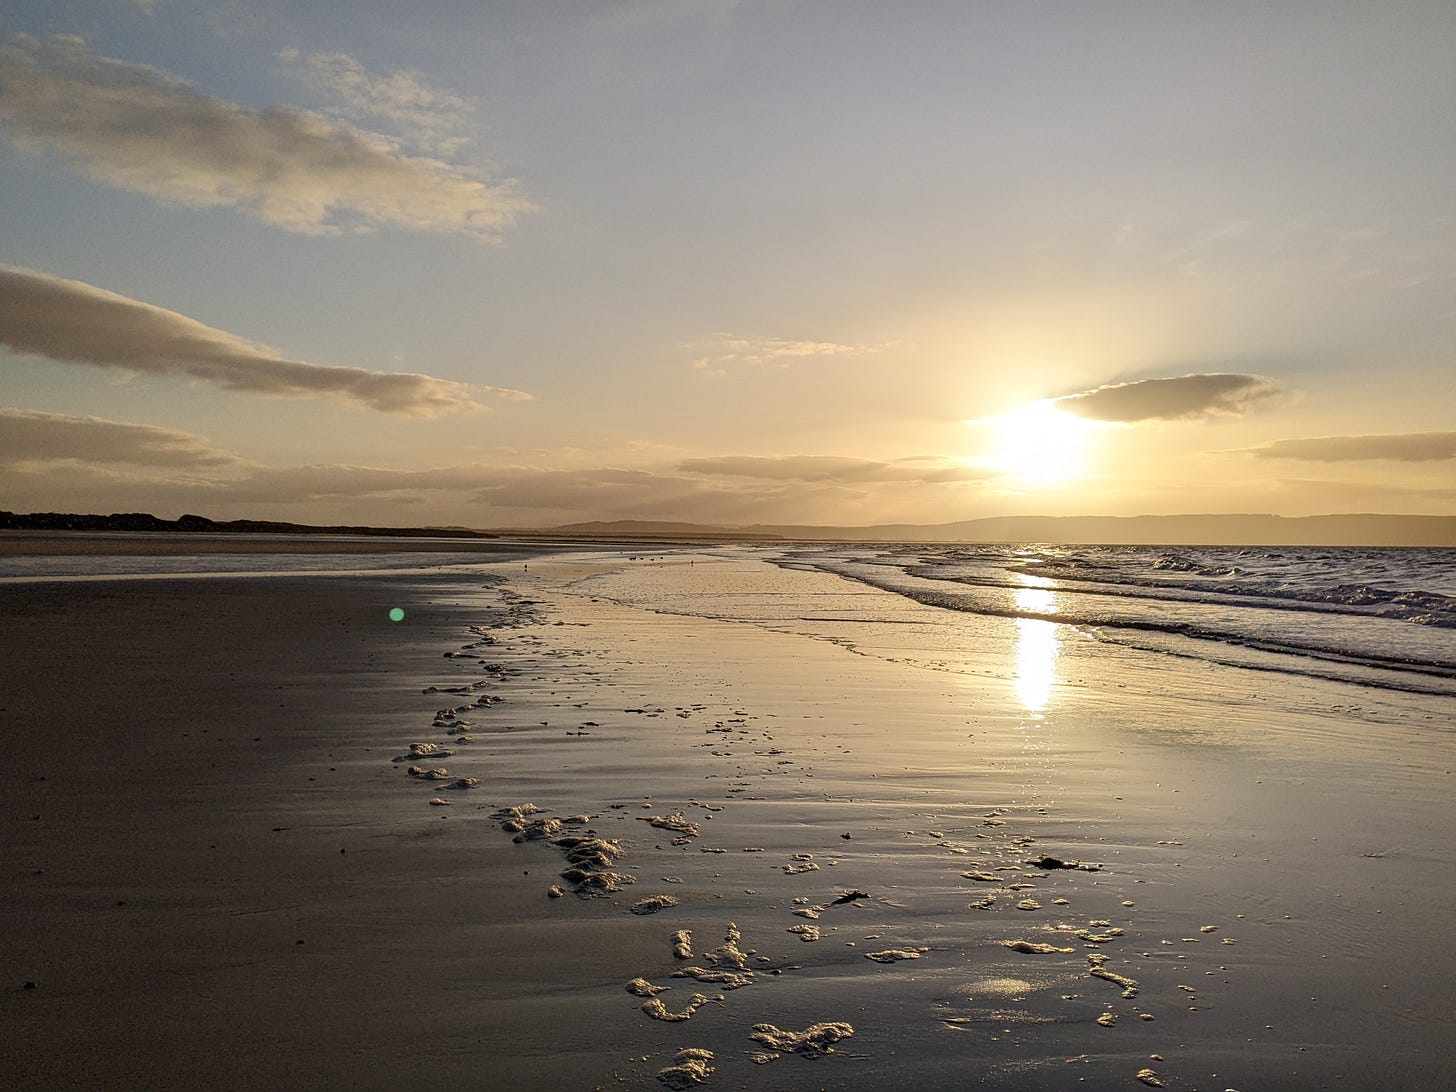 Sandy beach with gentle waves, hills beyond with the setting sun